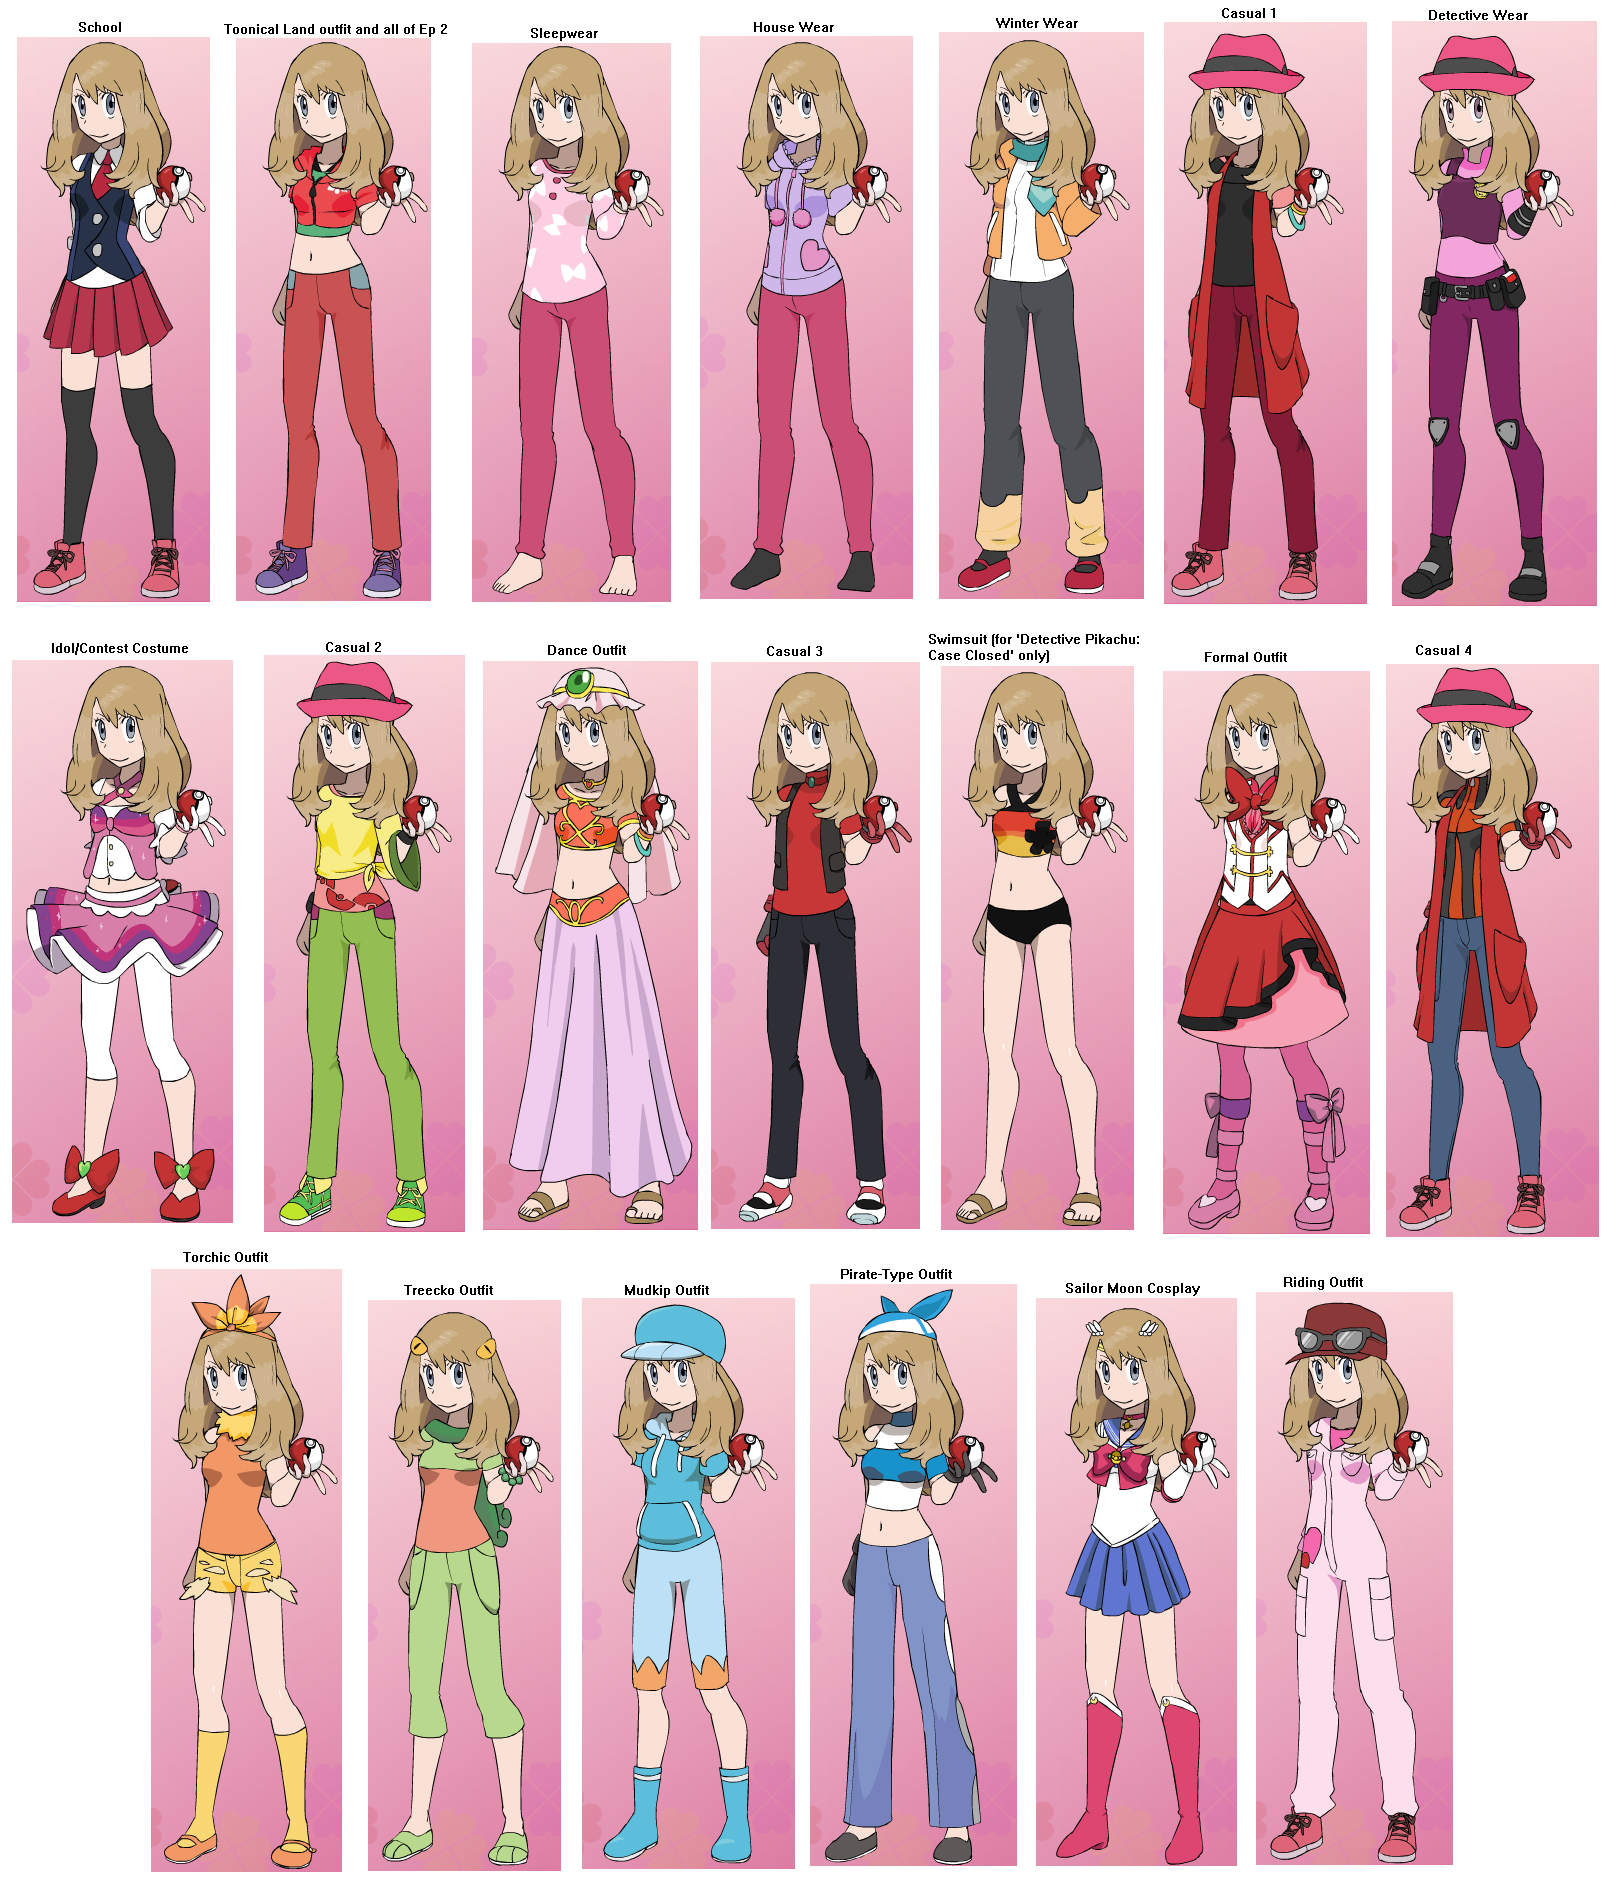 Serena S Outfits In Detective Pikachu Case Closed By Disneyequestrian2012 On Deviantart - red's clothes pokemon roblox